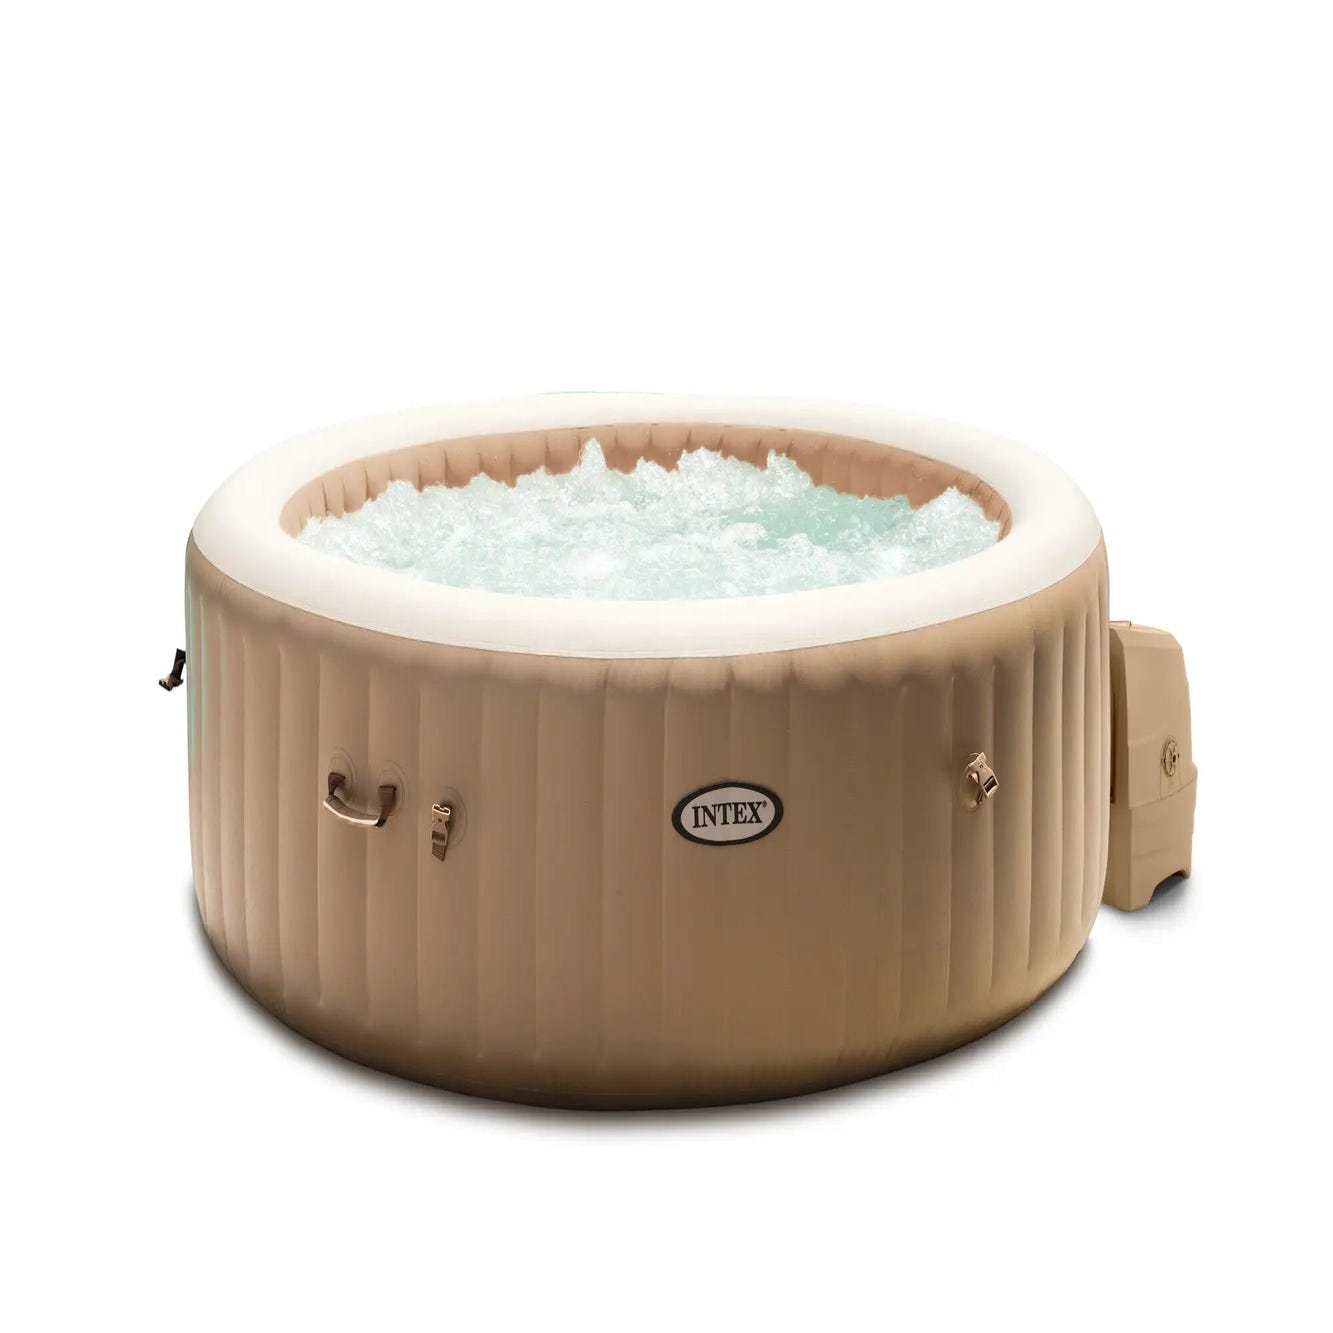 Pure spa gonflable INTEX Sahara rond 4 places